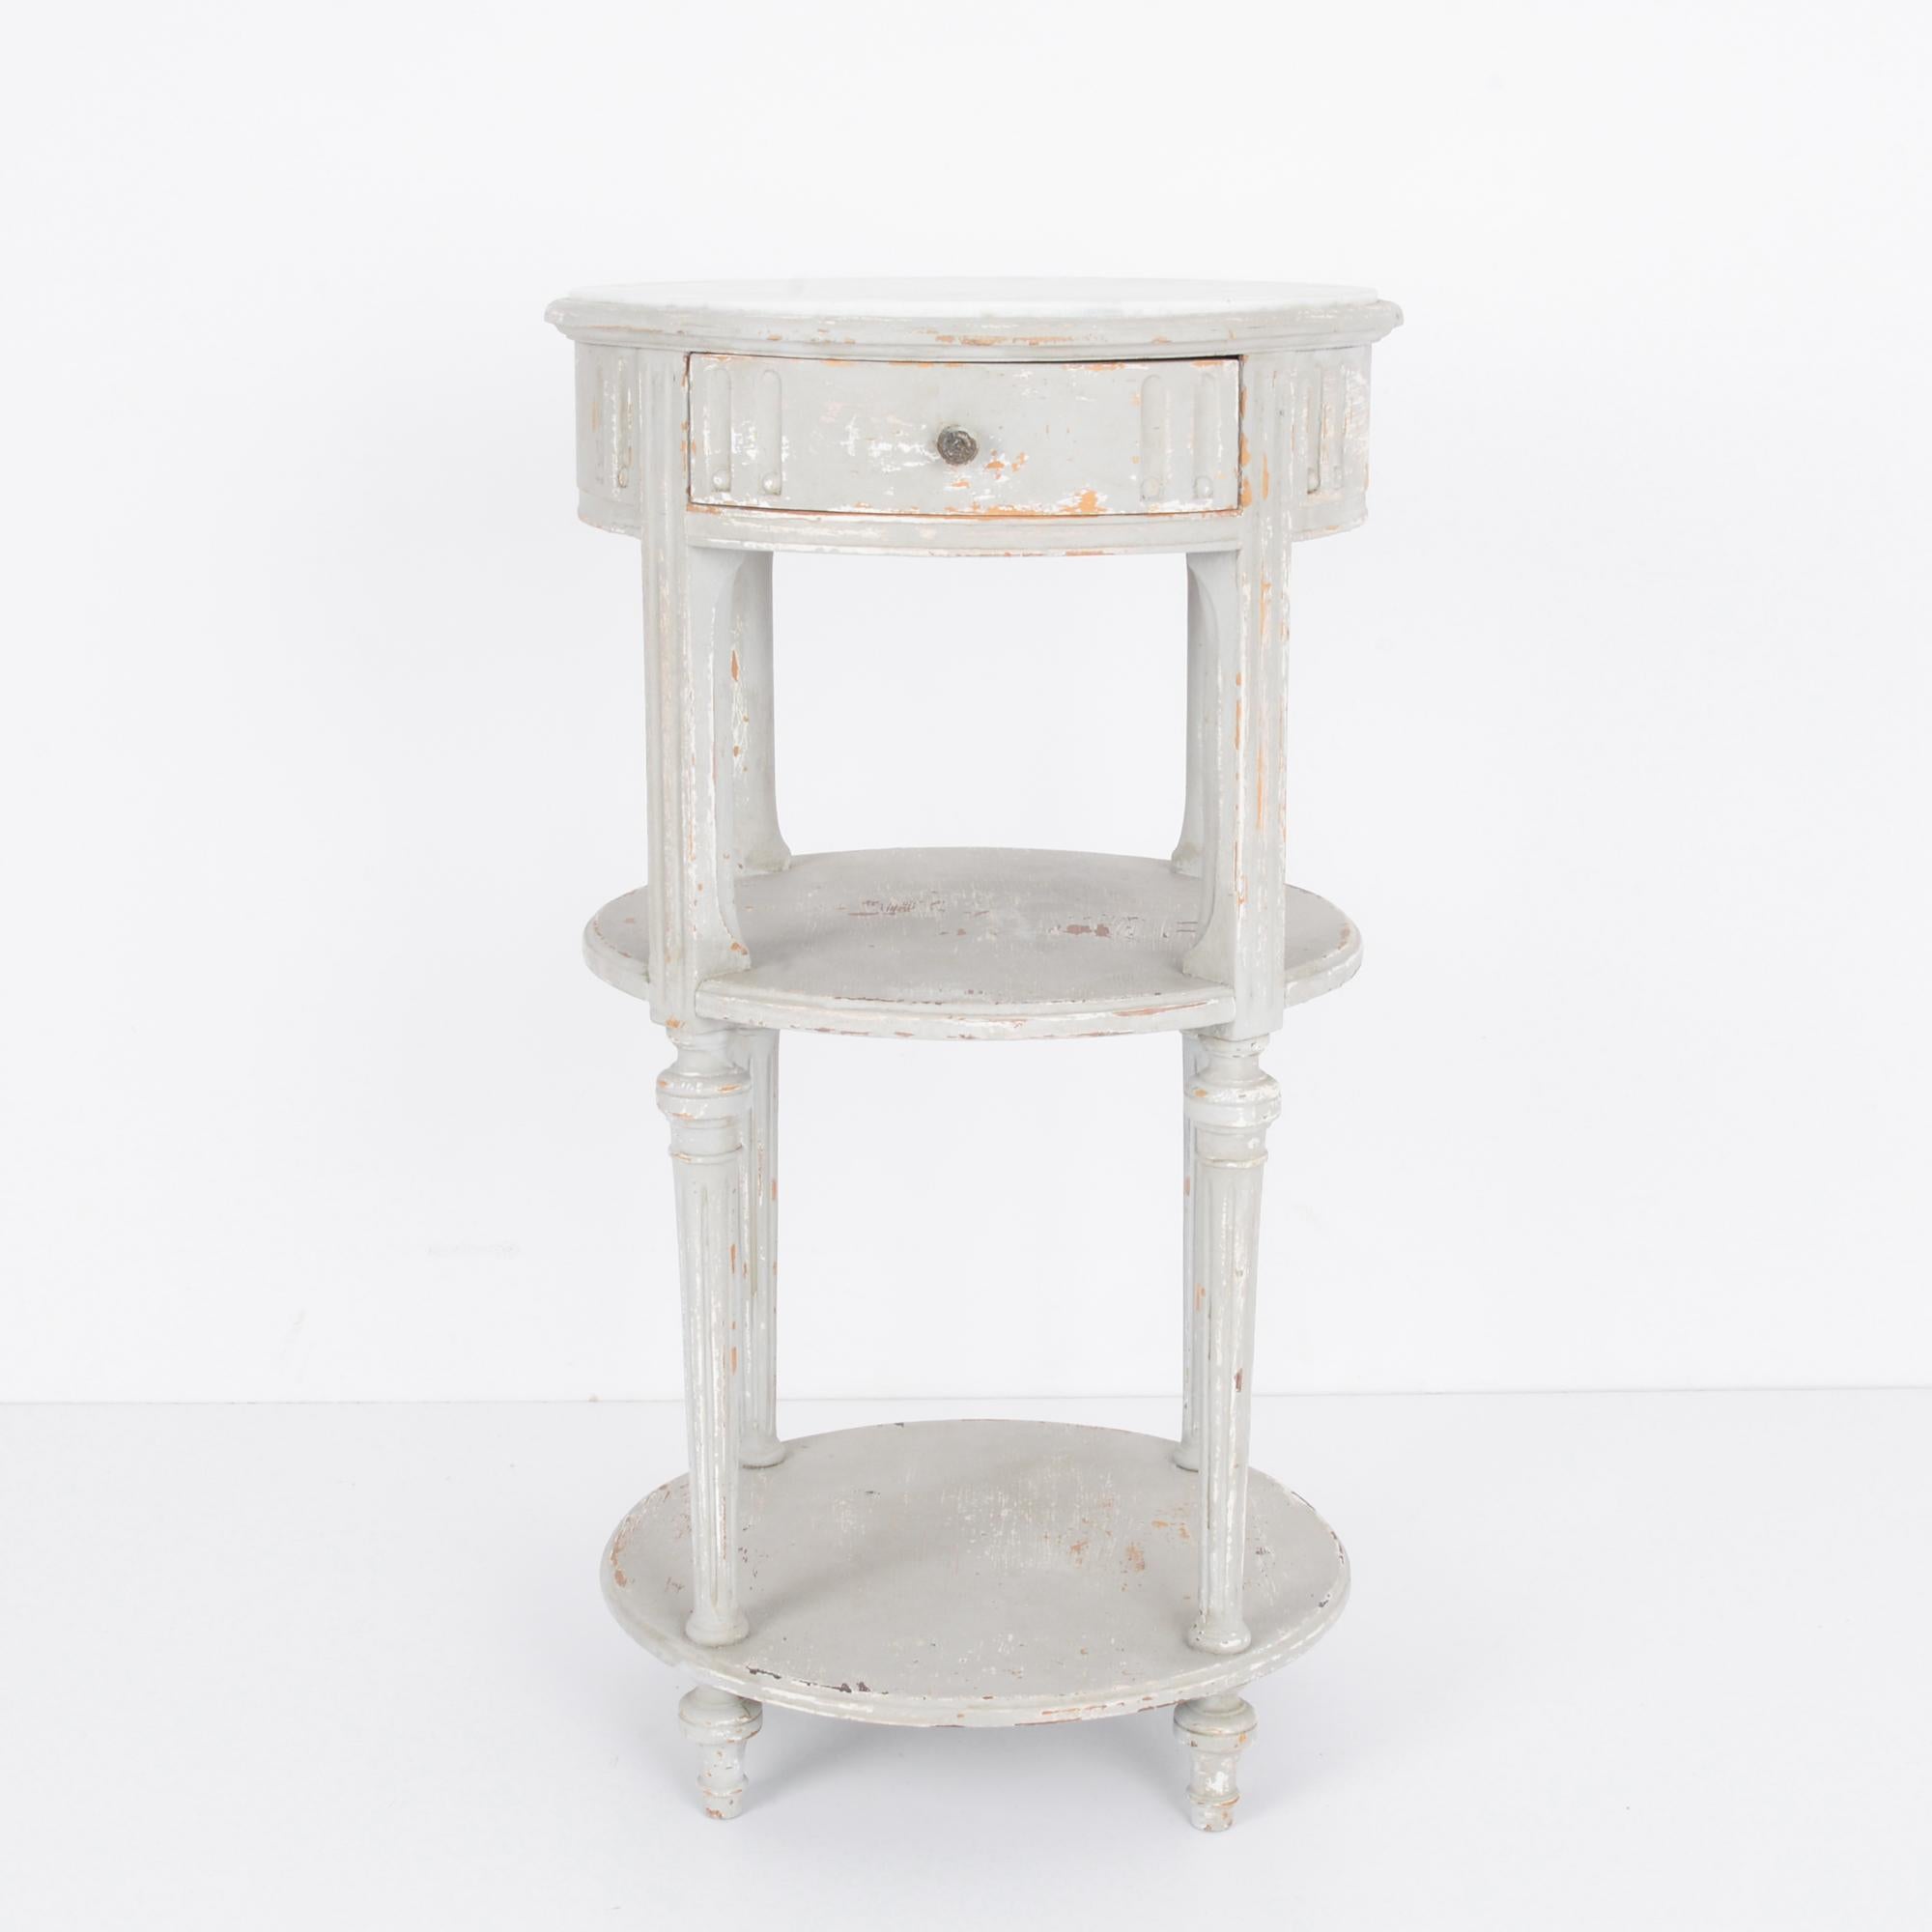 A vintage wood patinated table with marble top from France, circa 1900. Three-tiered table with sliding drawer. Fluted legs give this table an architectural aspect something like a bell tower waiting for its bell. A side table of a mover-shaker, a